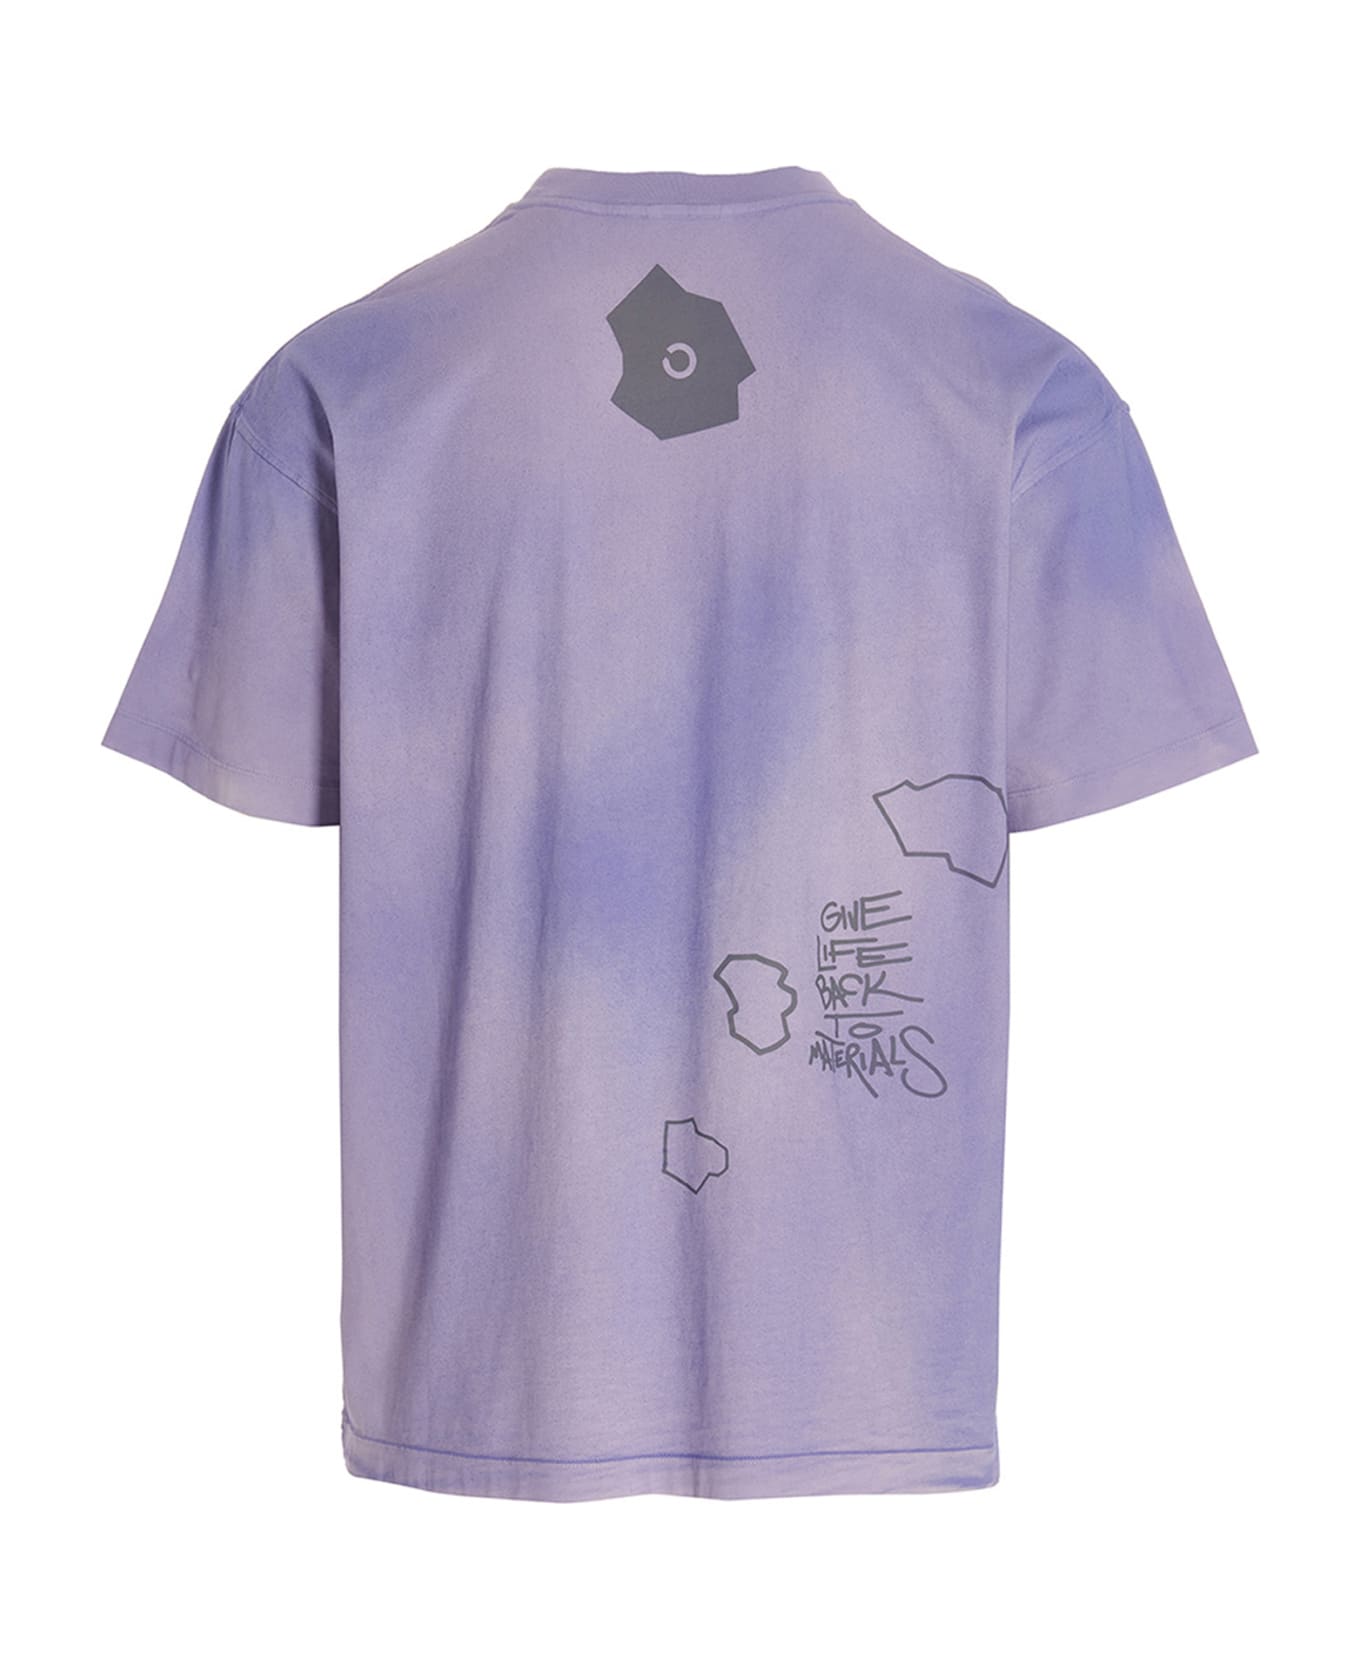 Objects Iv Life 'patina' T-shirt - LILAC シャツ